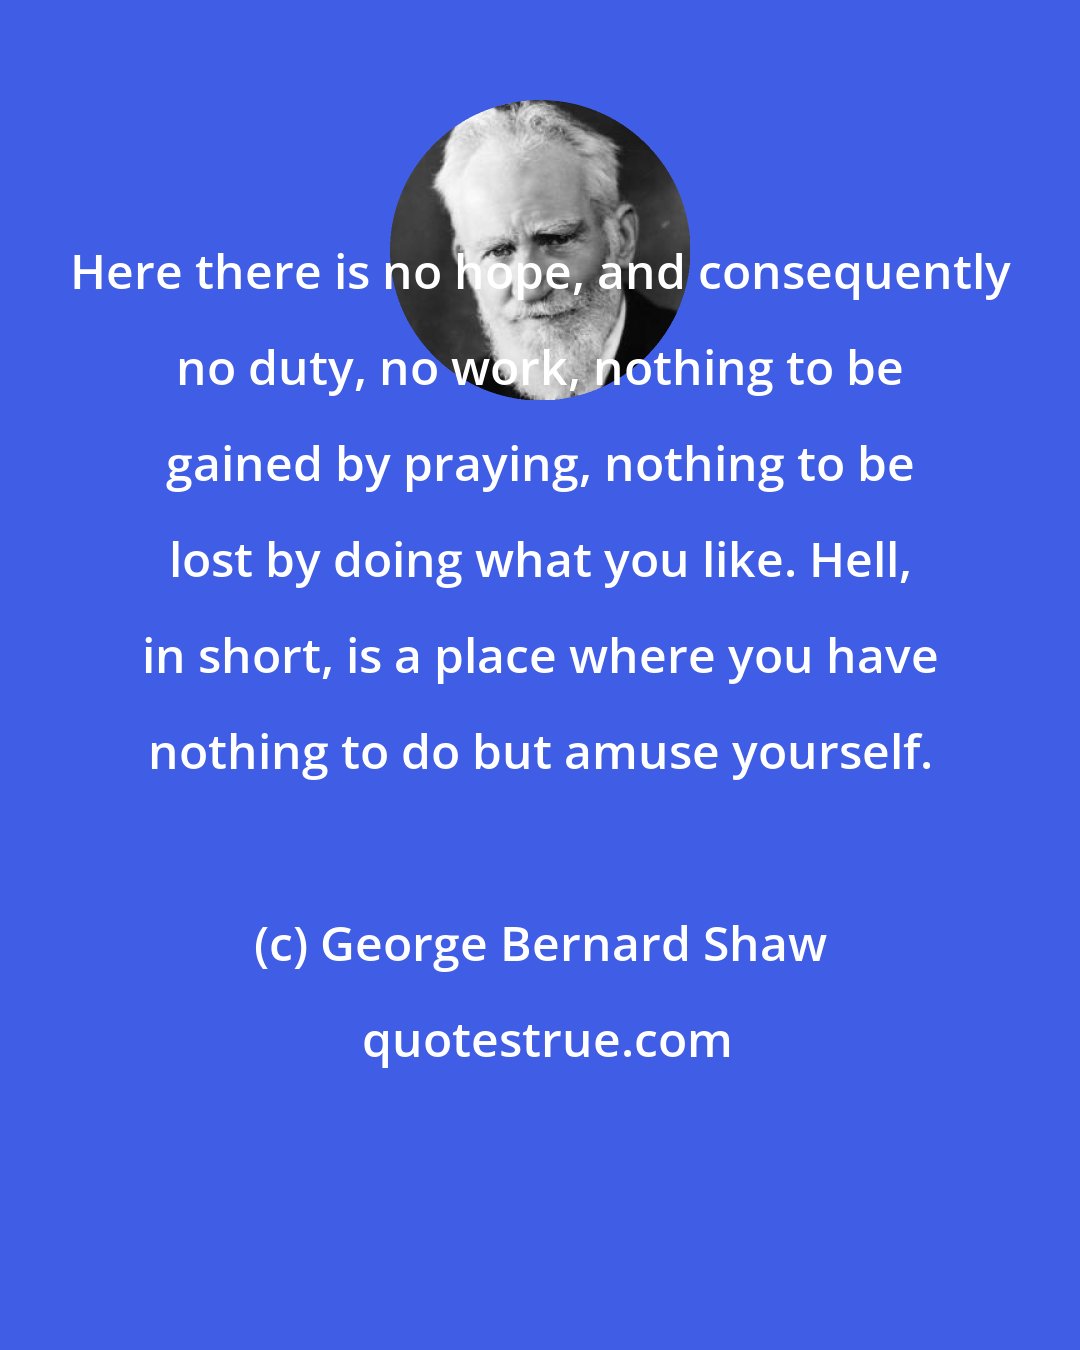 George Bernard Shaw: Here there is no hope, and consequently no duty, no work, nothing to be gained by praying, nothing to be lost by doing what you like. Hell, in short, is a place where you have nothing to do but amuse yourself.